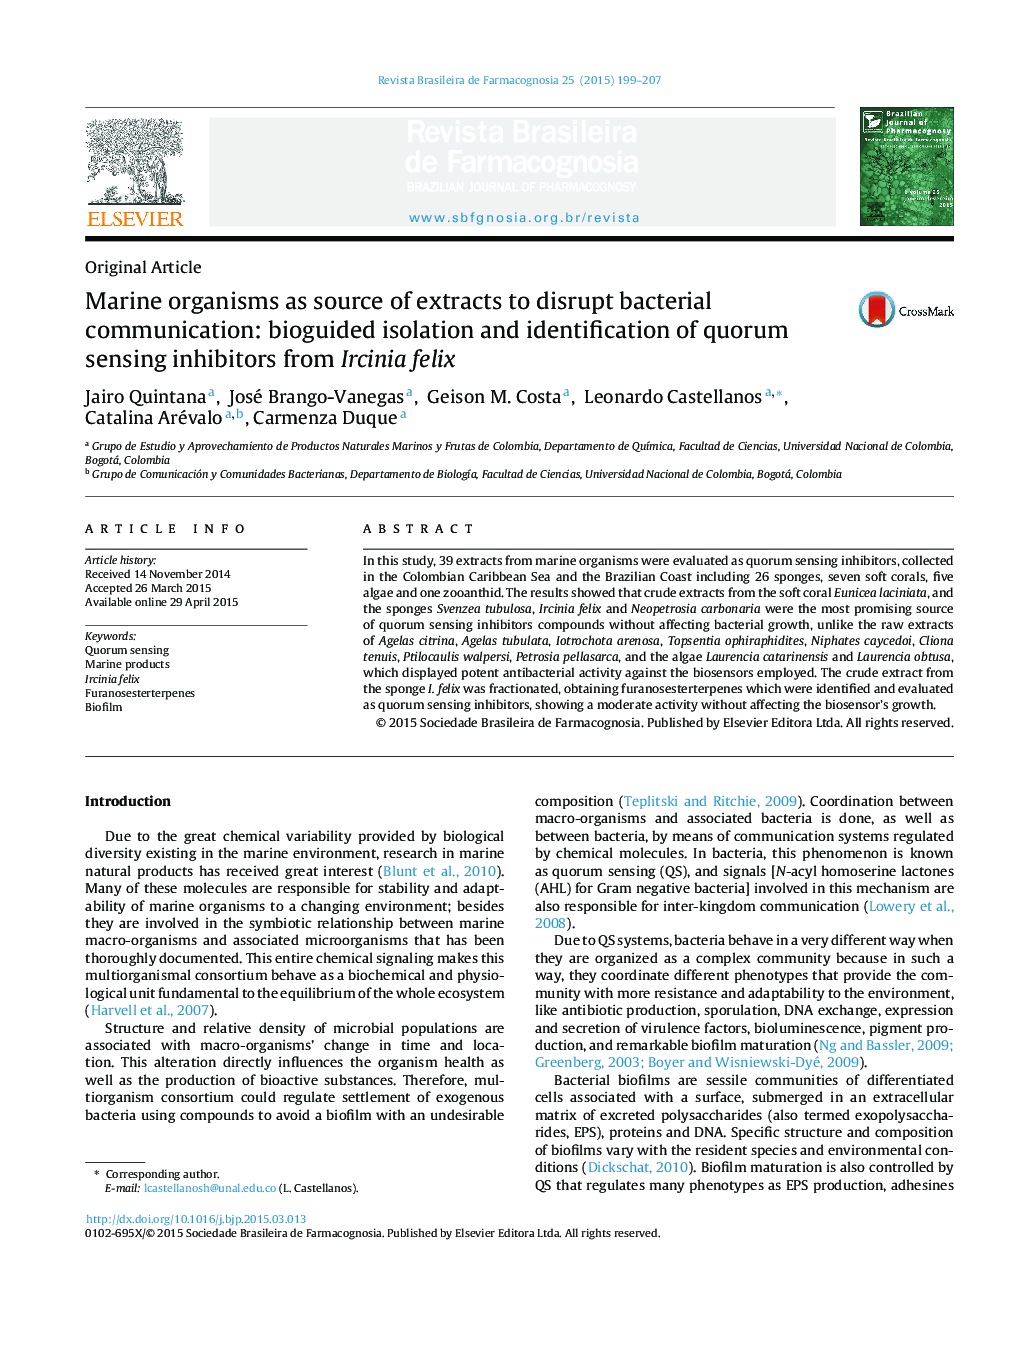 Marine organisms as source of extracts to disrupt bacterial communication: bioguided isolation and identification of quorum sensing inhibitors from Ircinia felix